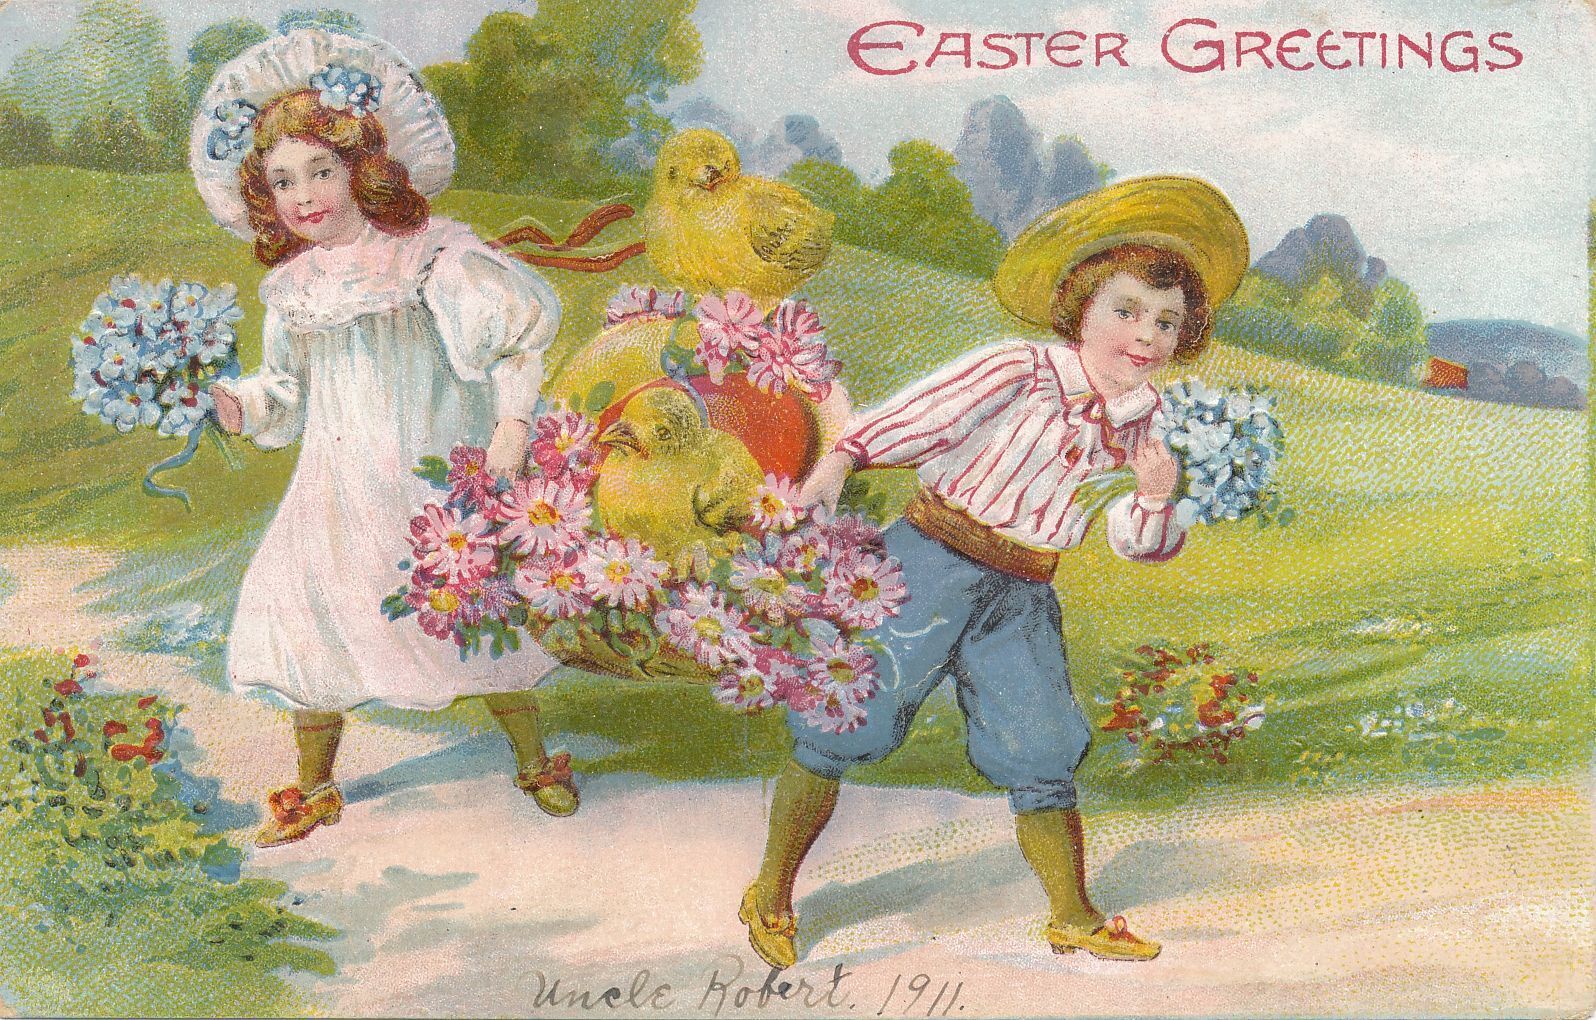 EASTER - Dressed Up Children Carrying Basket Of Chicks and Flowers Postcard-1911